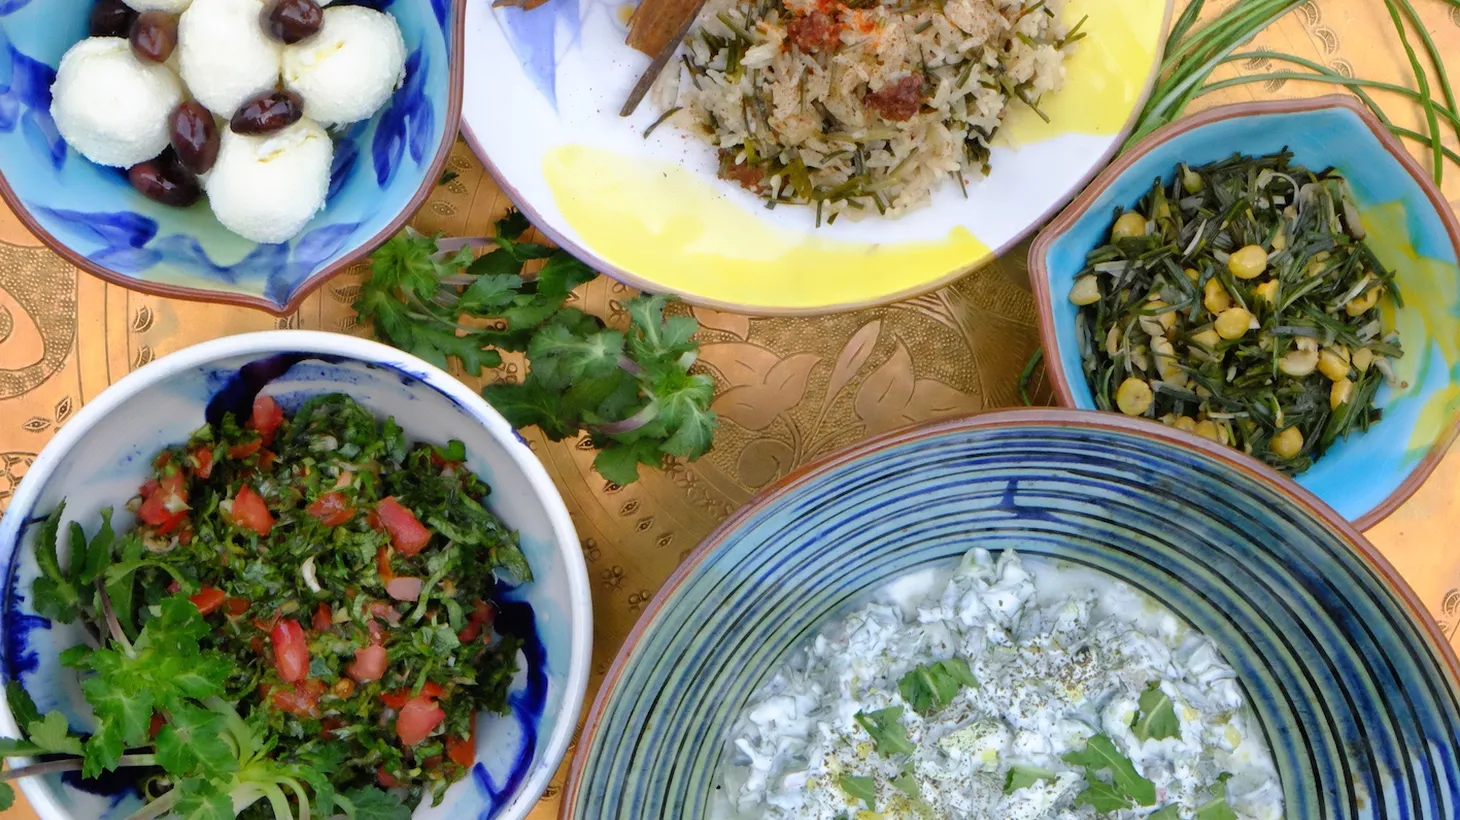 In Lebanon, foraged wild edibles play a crucial role in dishes such as salsify pilaf, wild chicory with yogurt sauce, eryngo tabbouleh, artisanal goat cheese, and salsify with qawarma (confit of lamb).